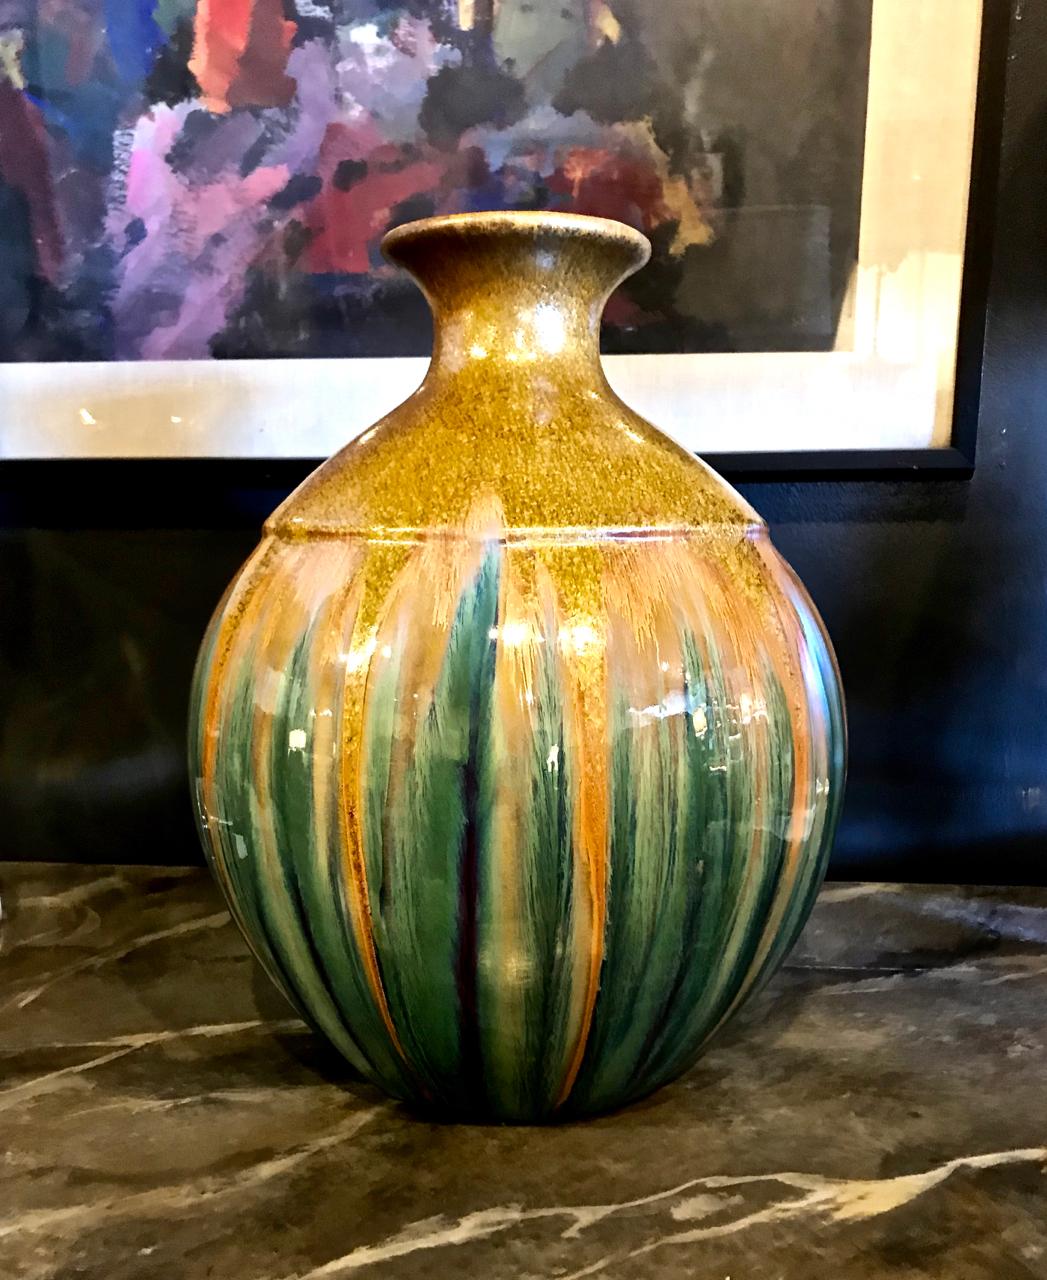 This is a unique beautifully iridescent glazed 20th century vase. The vase is hand potted in a traditional form; the finely glazed surface included 24-karat gold flakes to the top 1/3 of vessel. There is an signature mark on the bottom which has not